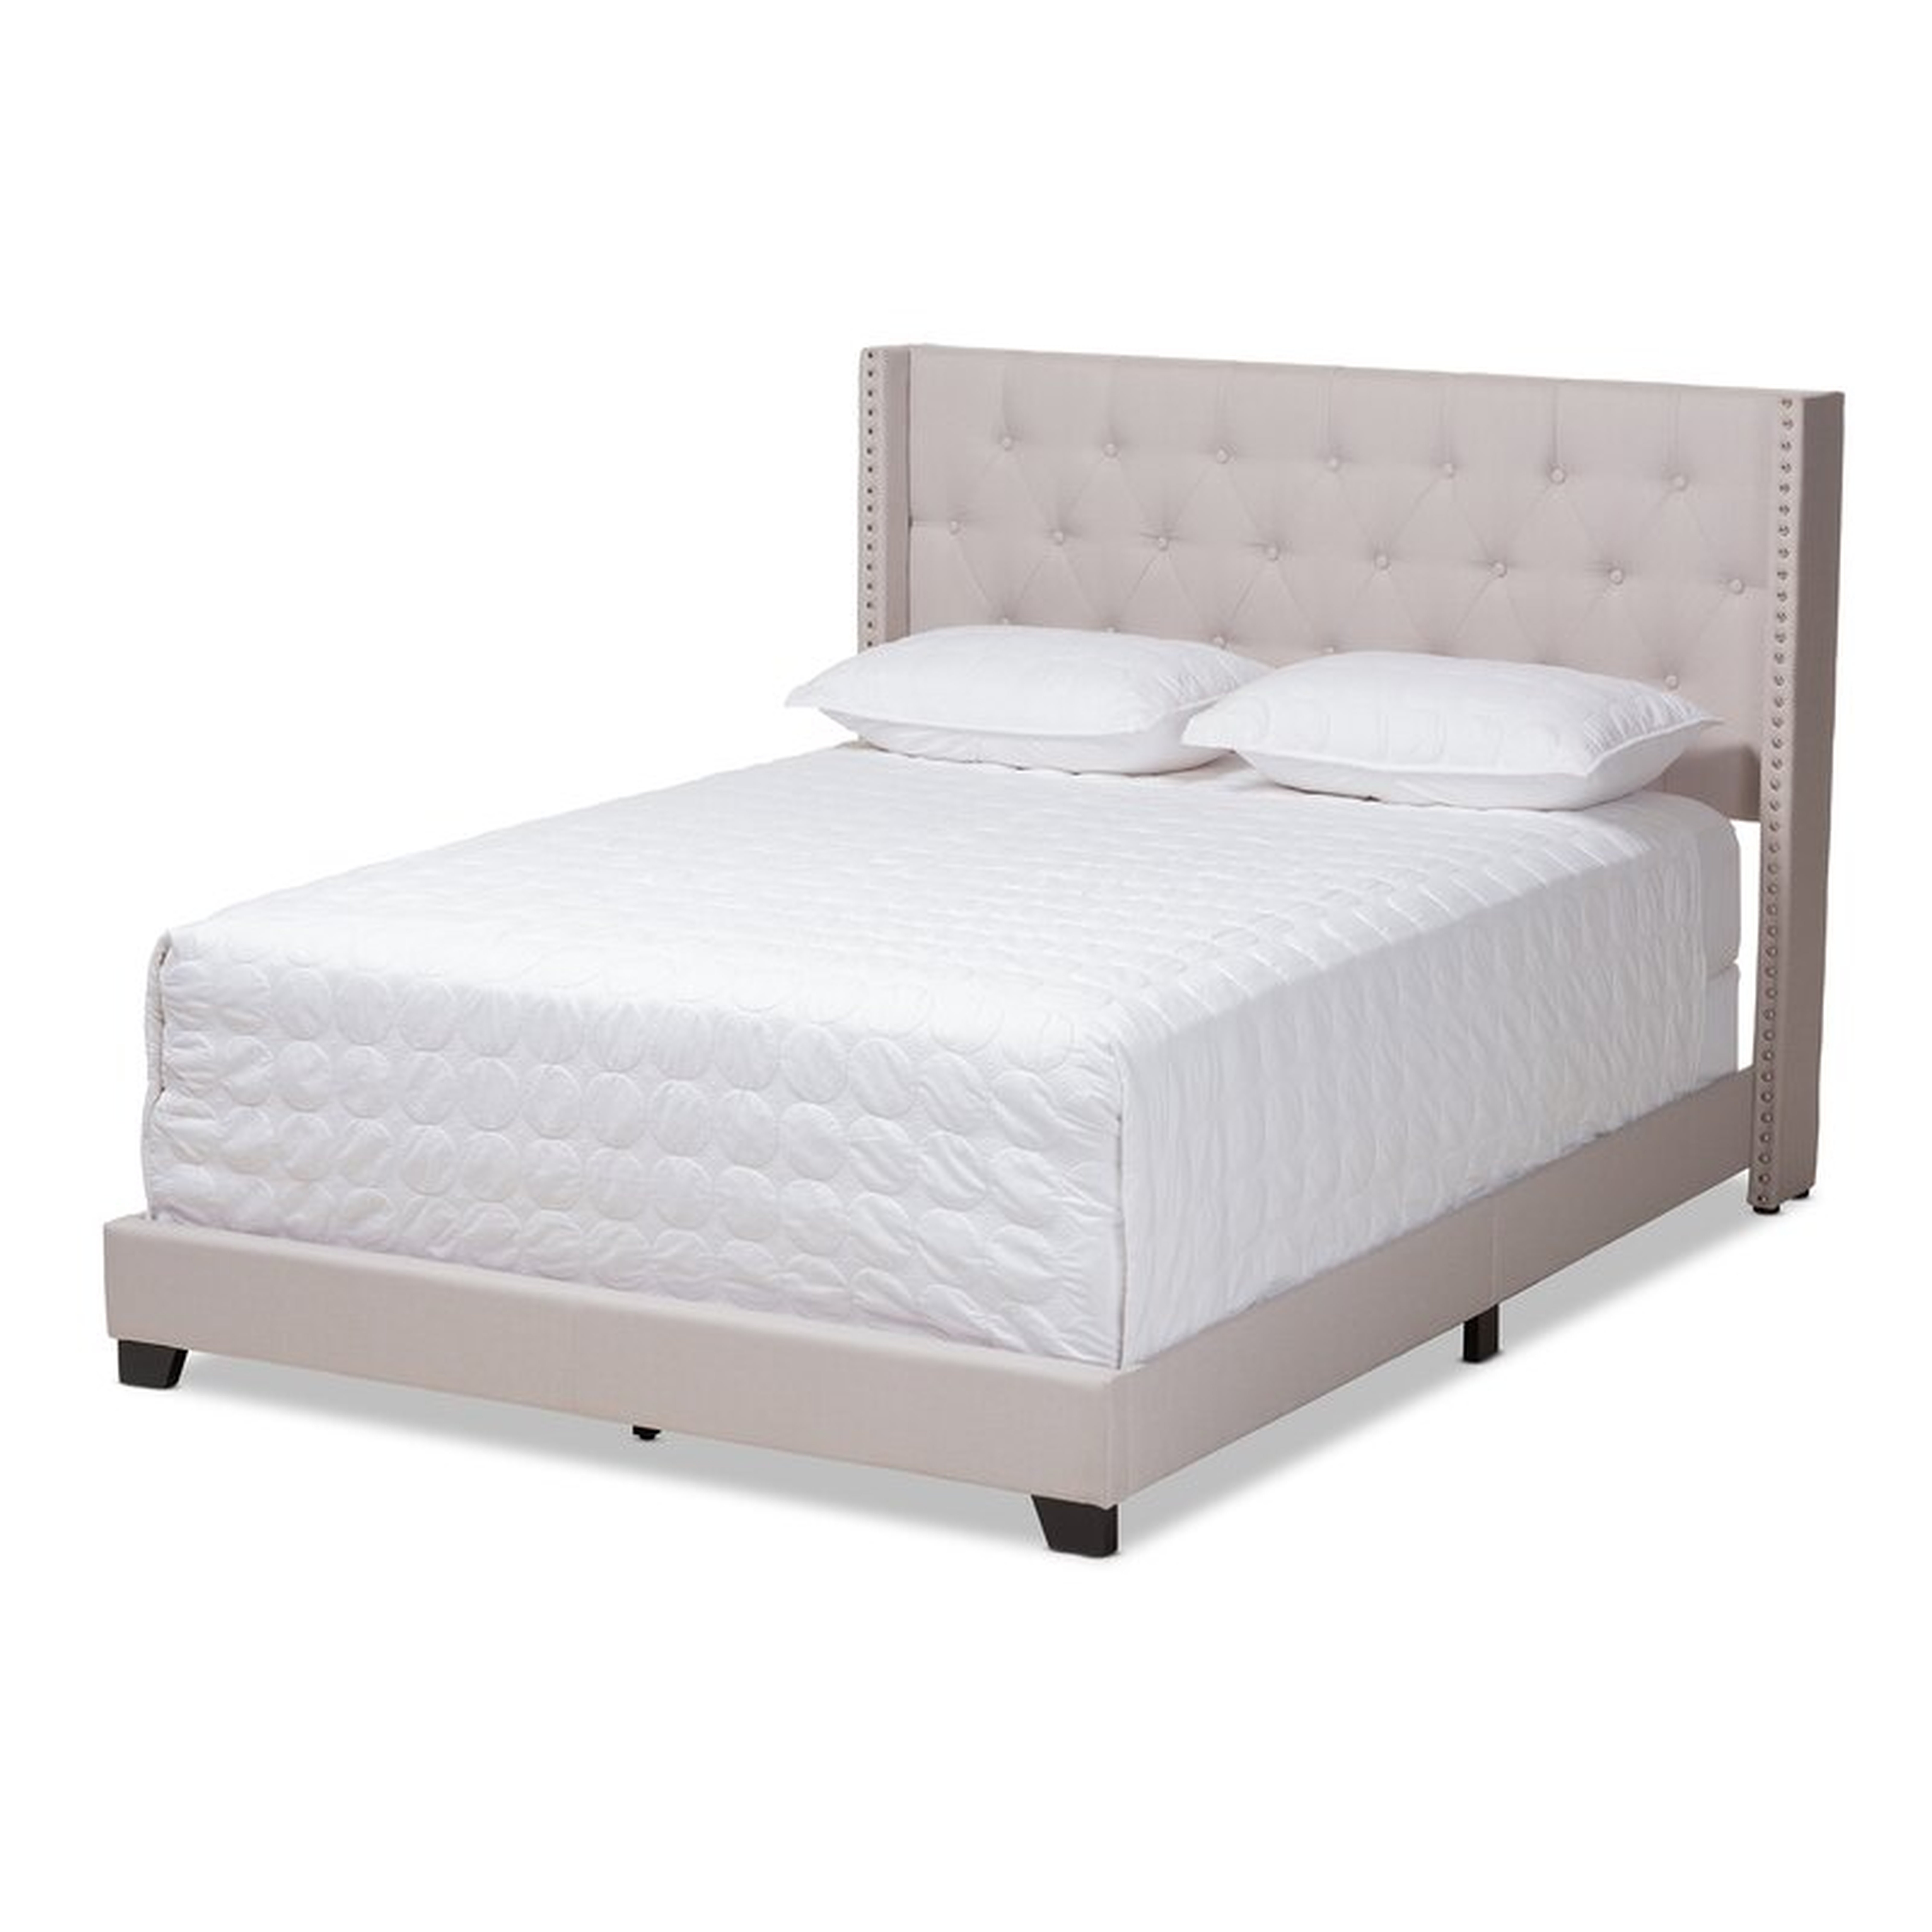 Anner Tufted Upholstered Low Profile Standard Bed - Wayfair